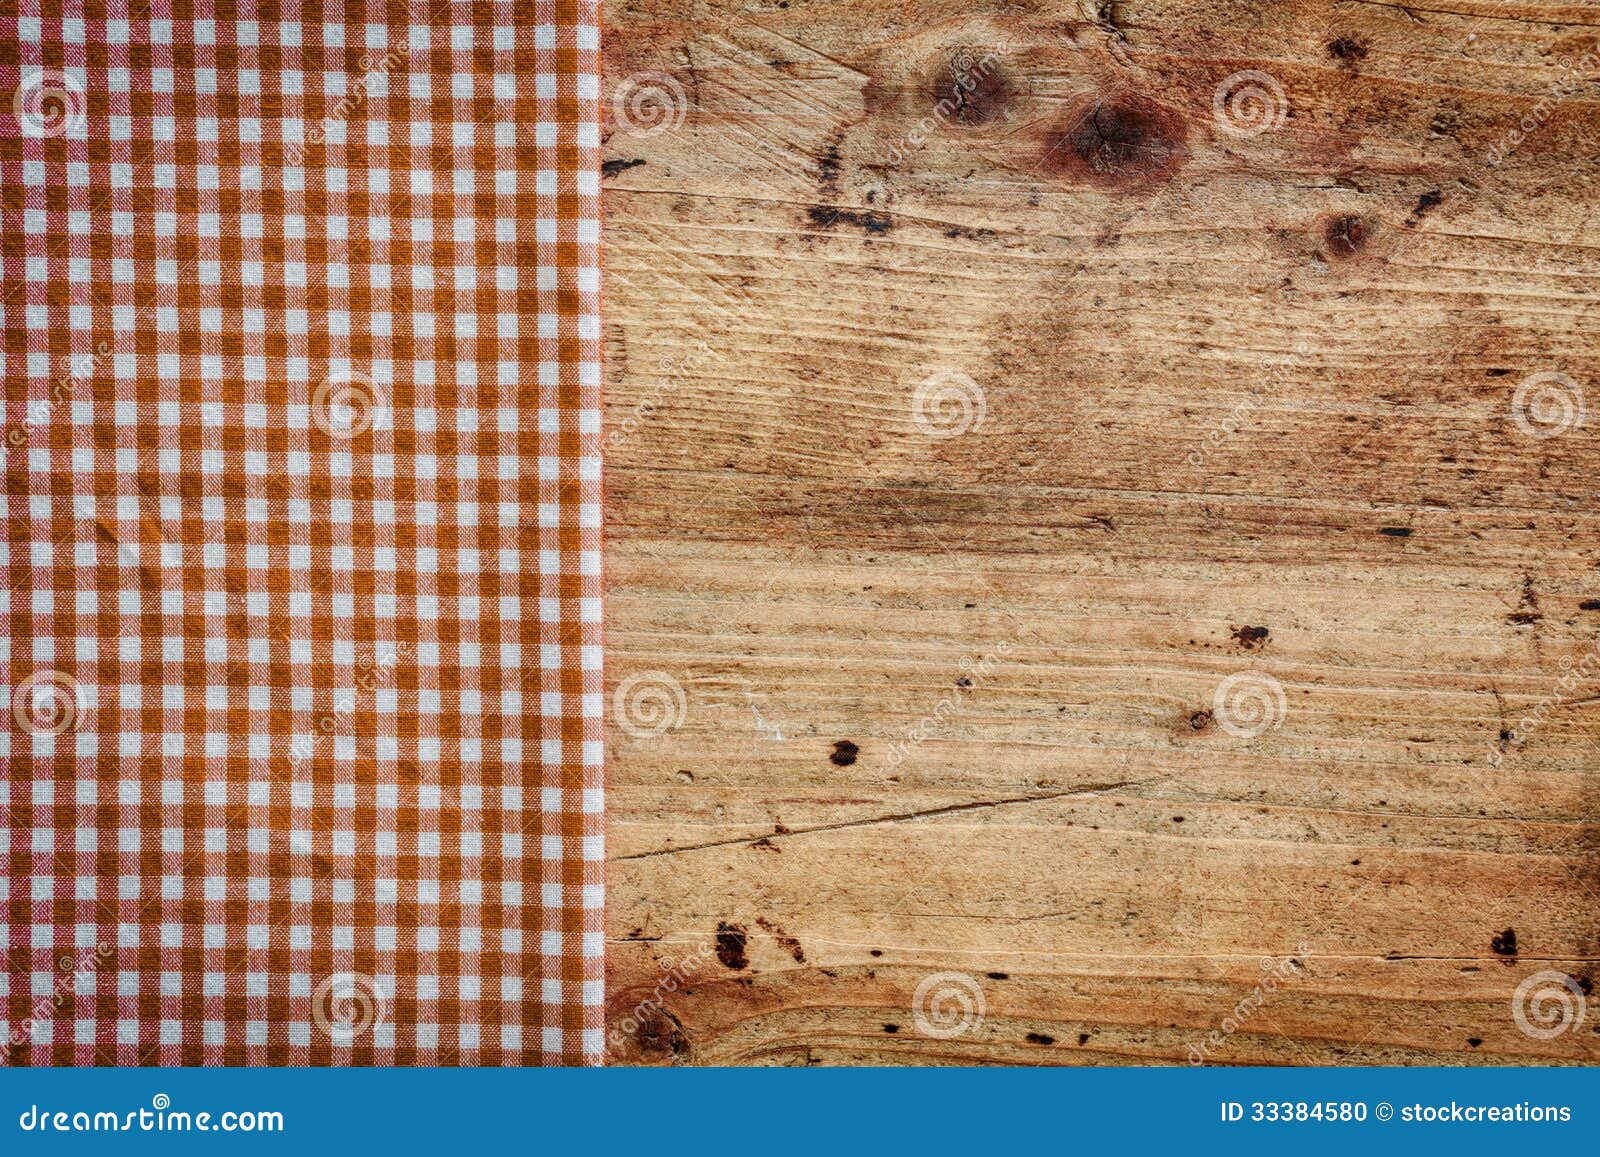 wood background with checked napkin